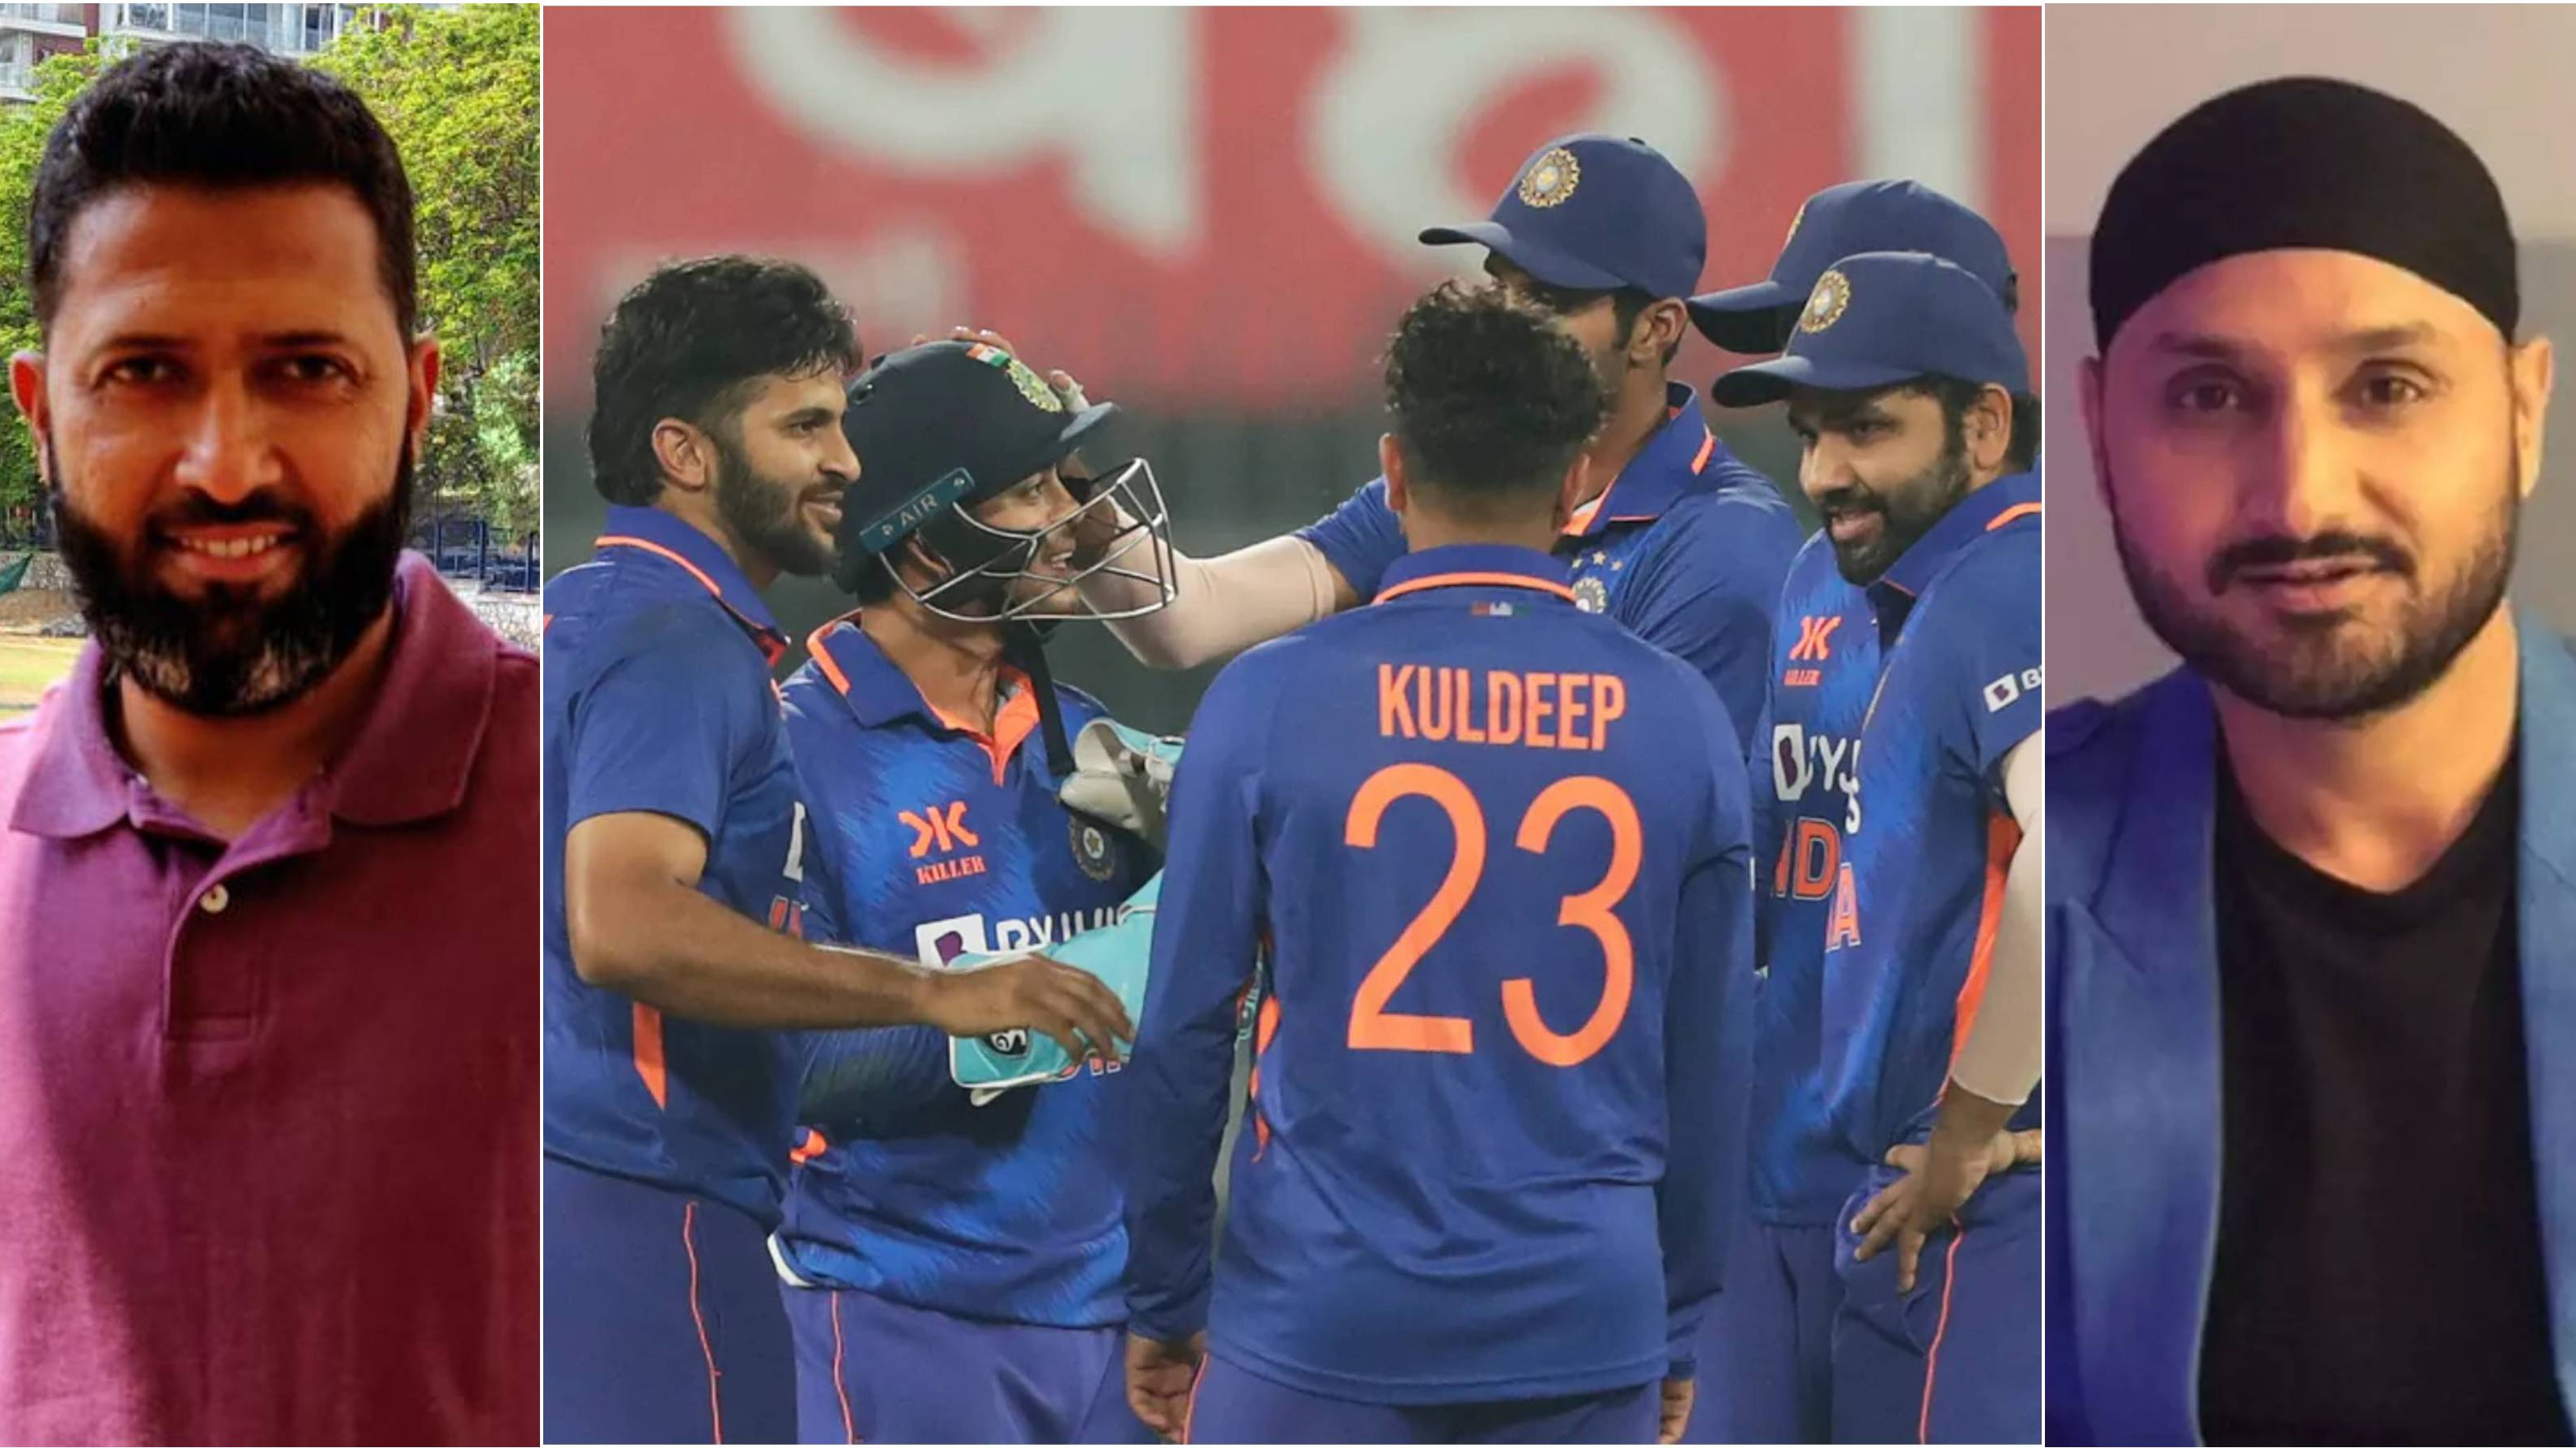 IND v NZ 2023: Cricket fraternity reacts as India dethrone New Zealand from top ODI spot with clean sweep